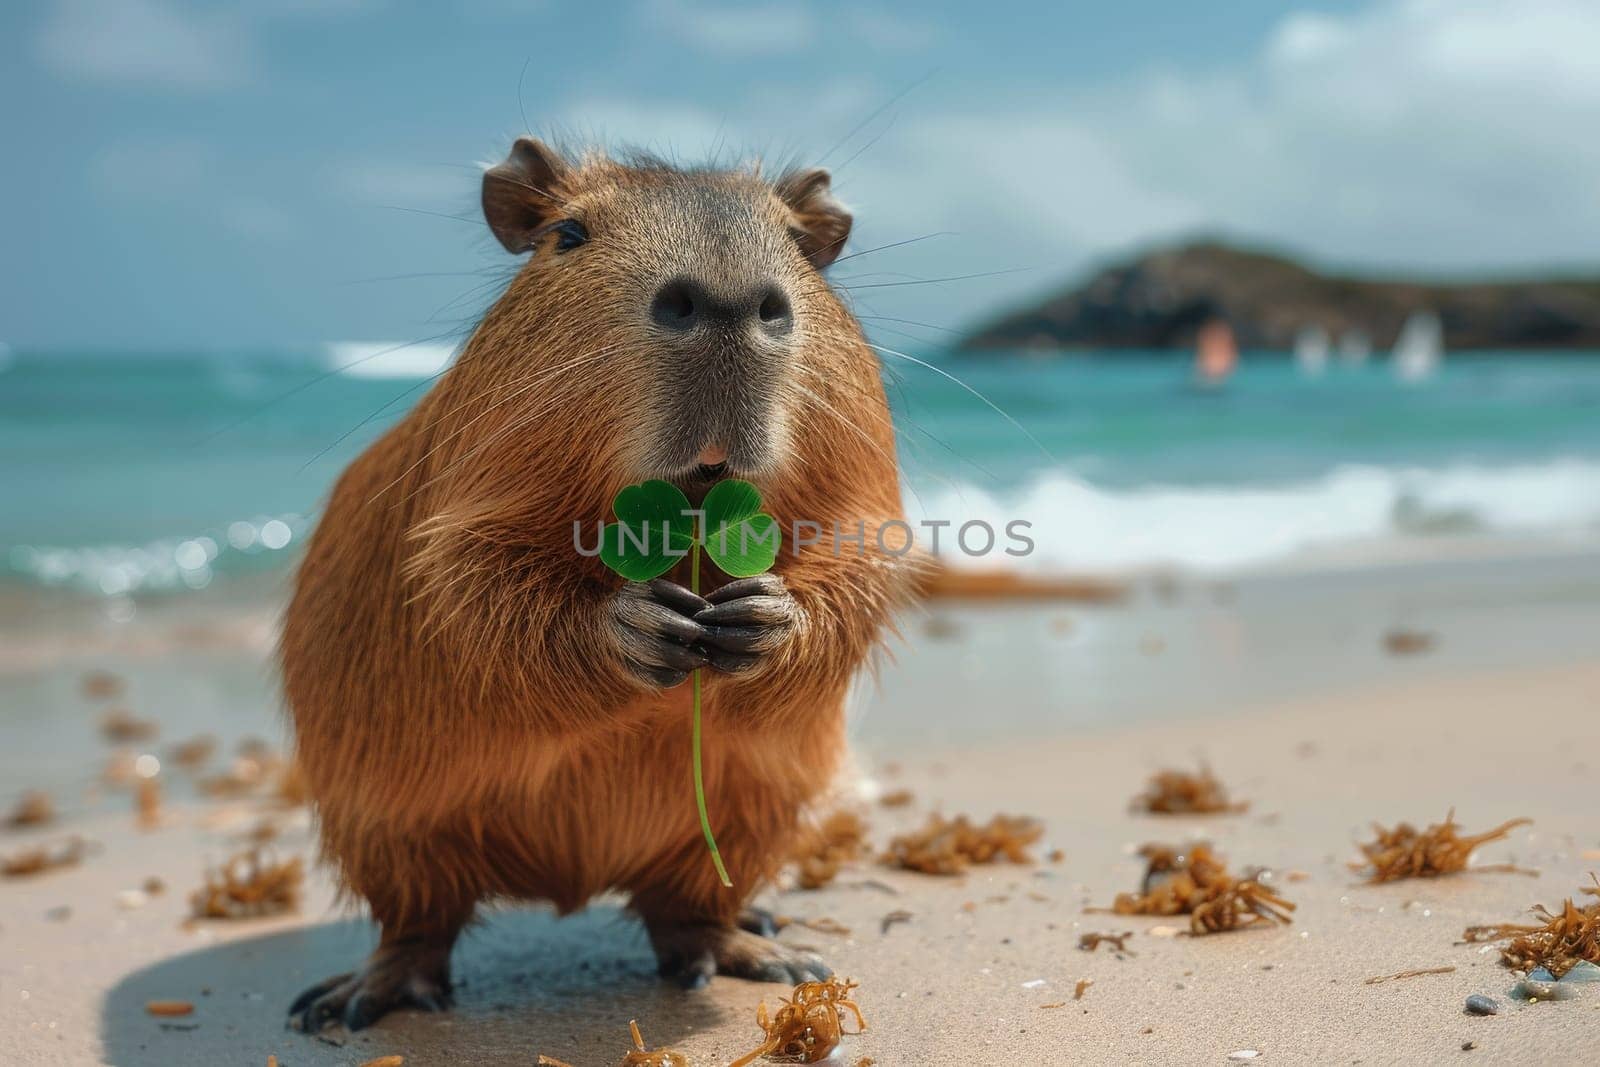 A brown capybara is holding a clover in its mouth on a beach. The scene is peaceful and serene, with the ocean in the background